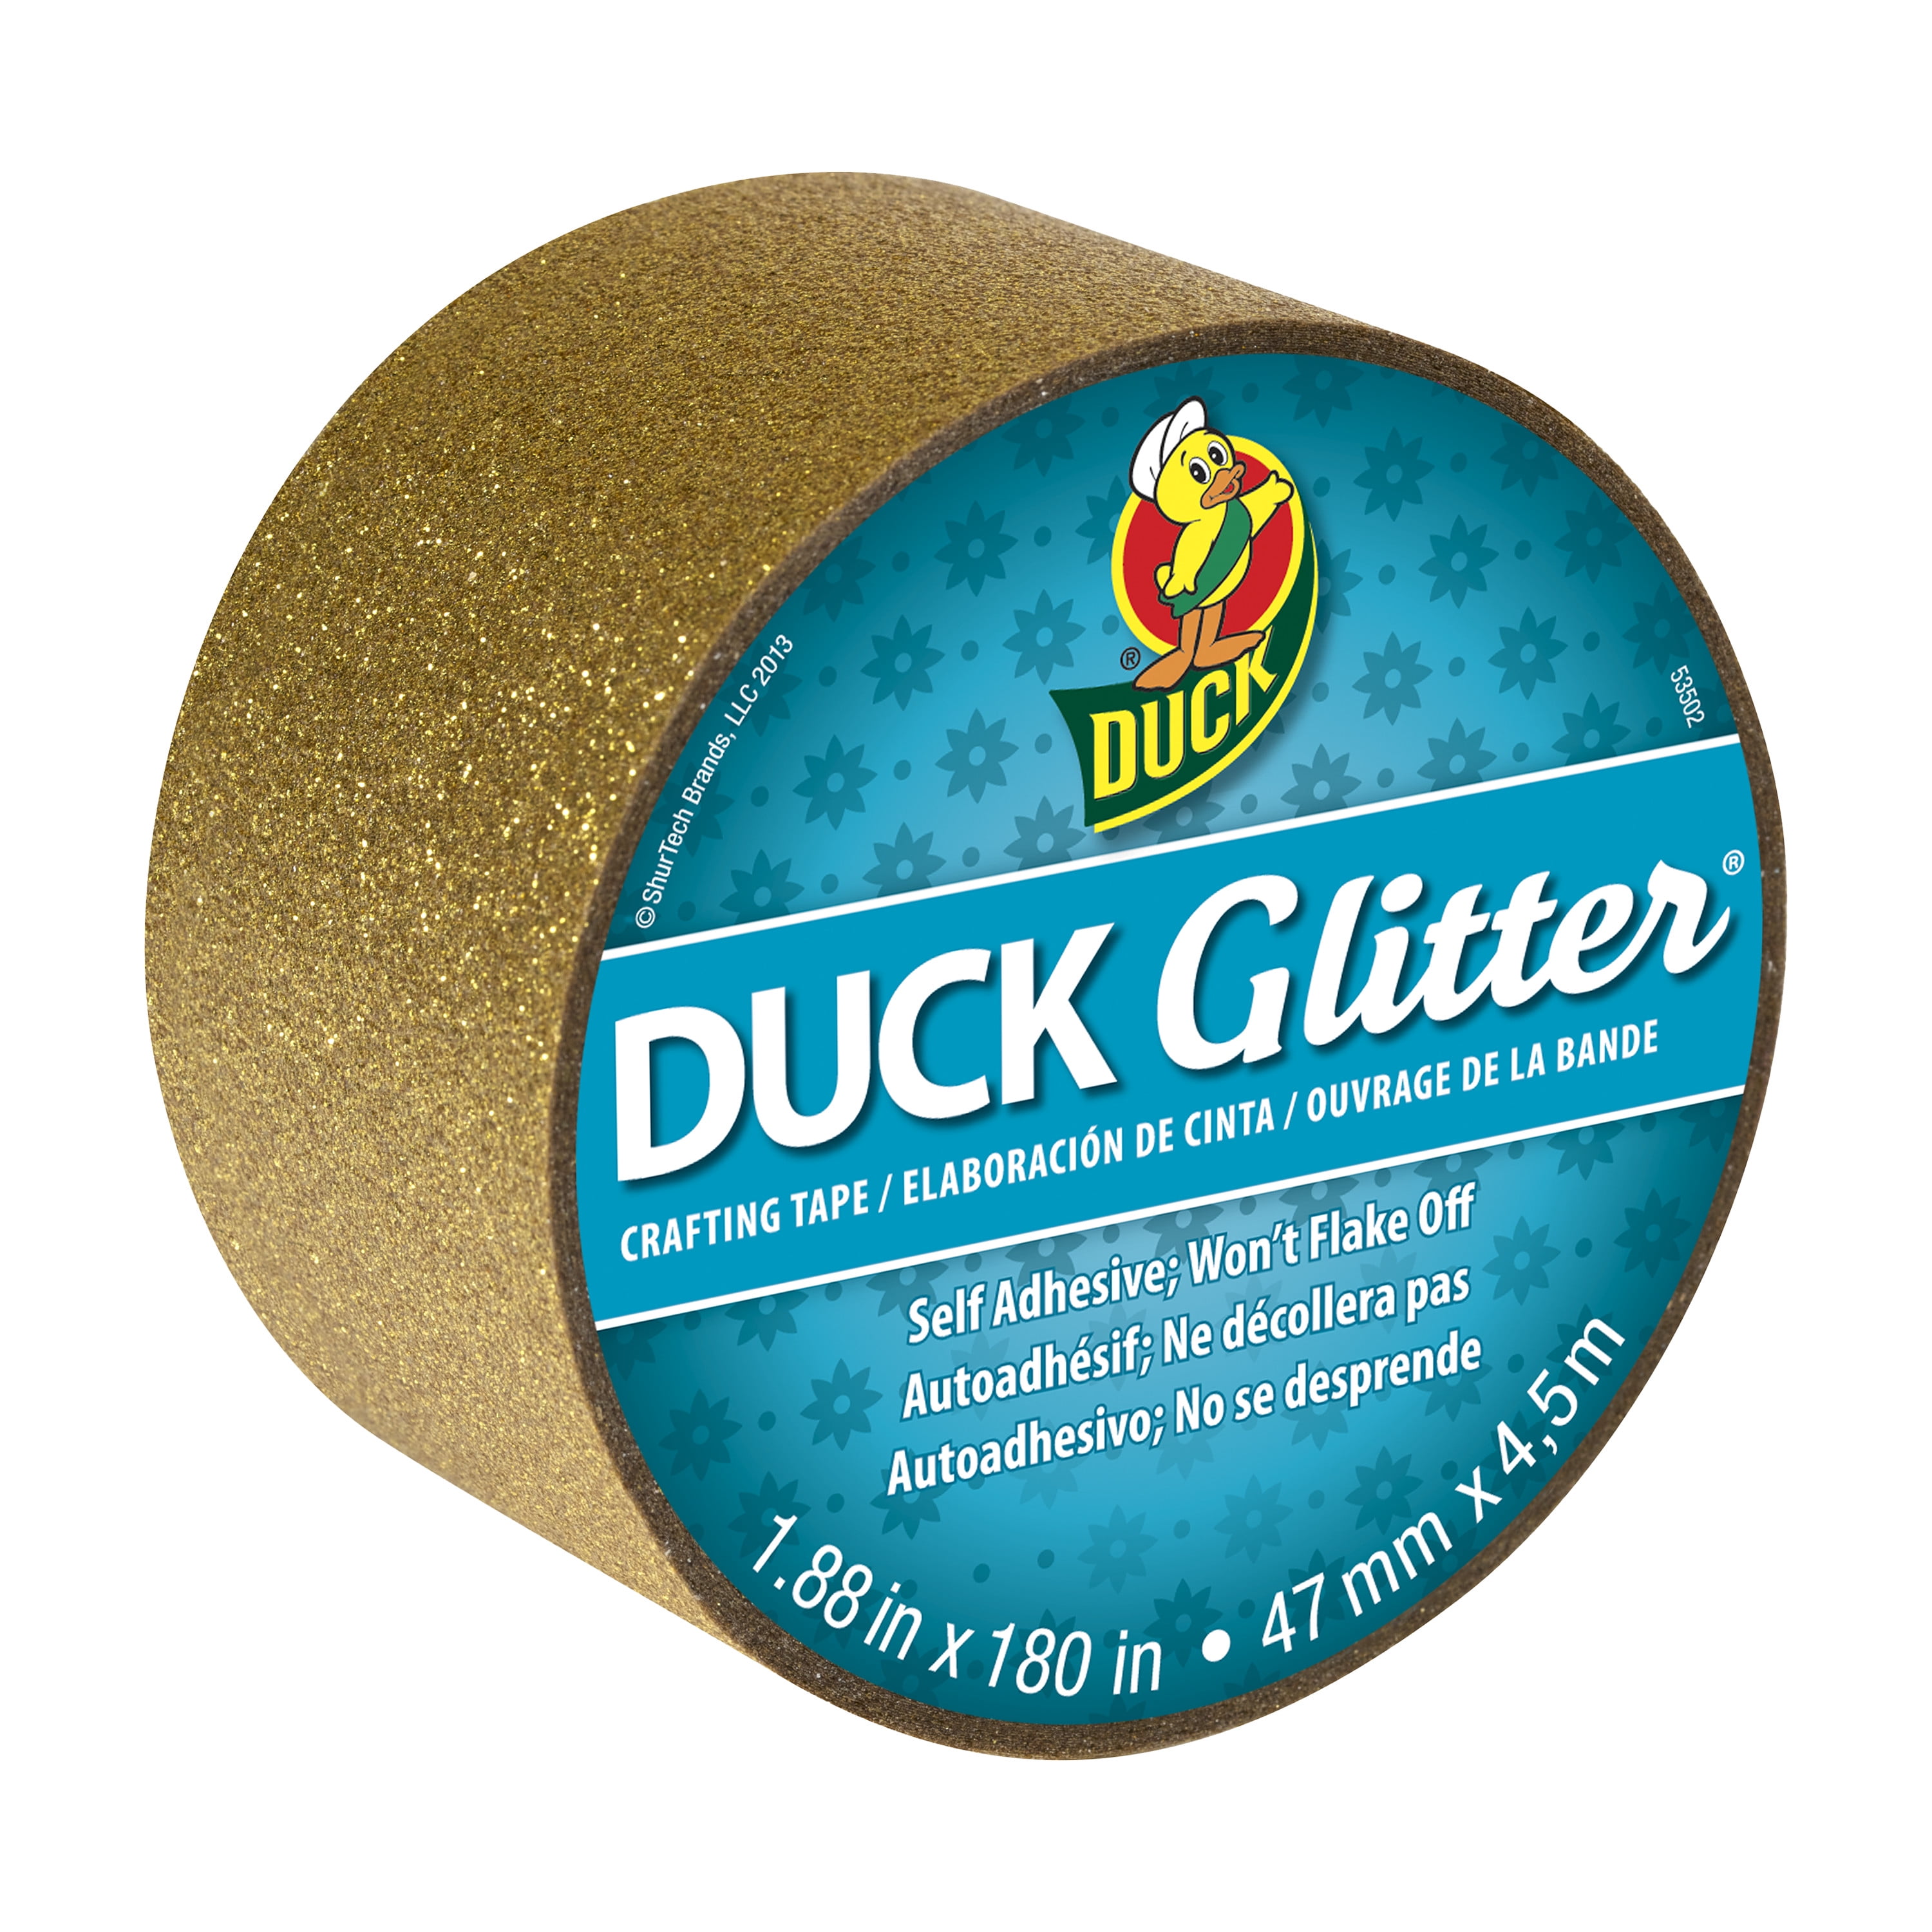 Duck Glitter Crafting Tape - Gold, 5 Yards 